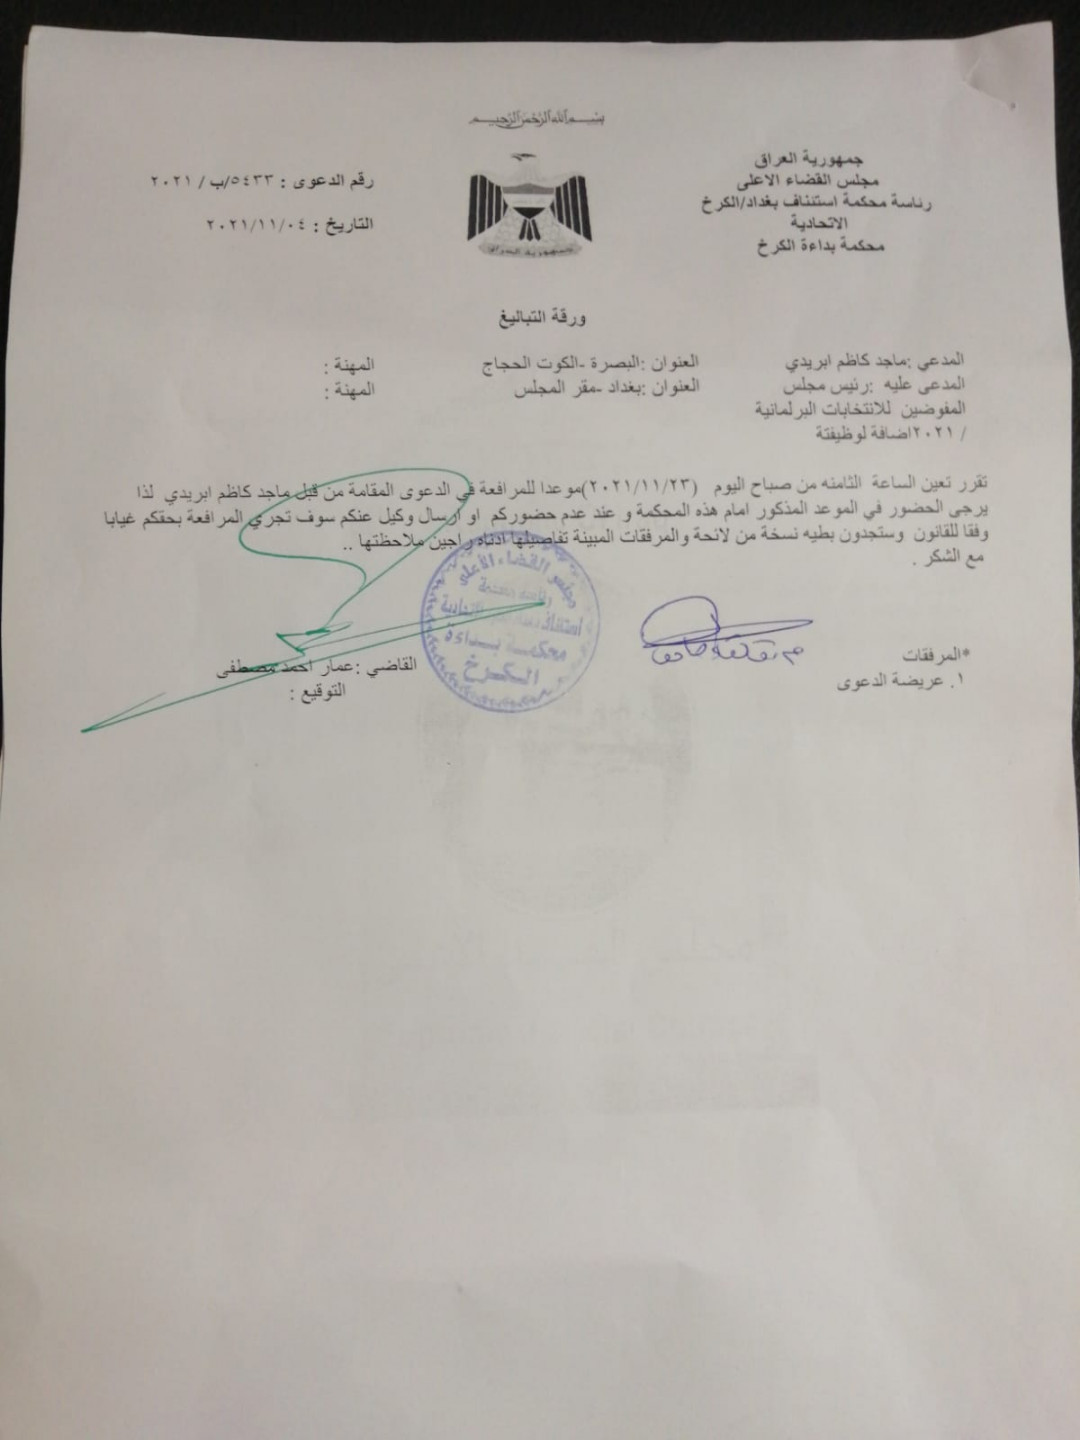 Documents .. A judge files a lawsuit in Baghdad to annul the election results 